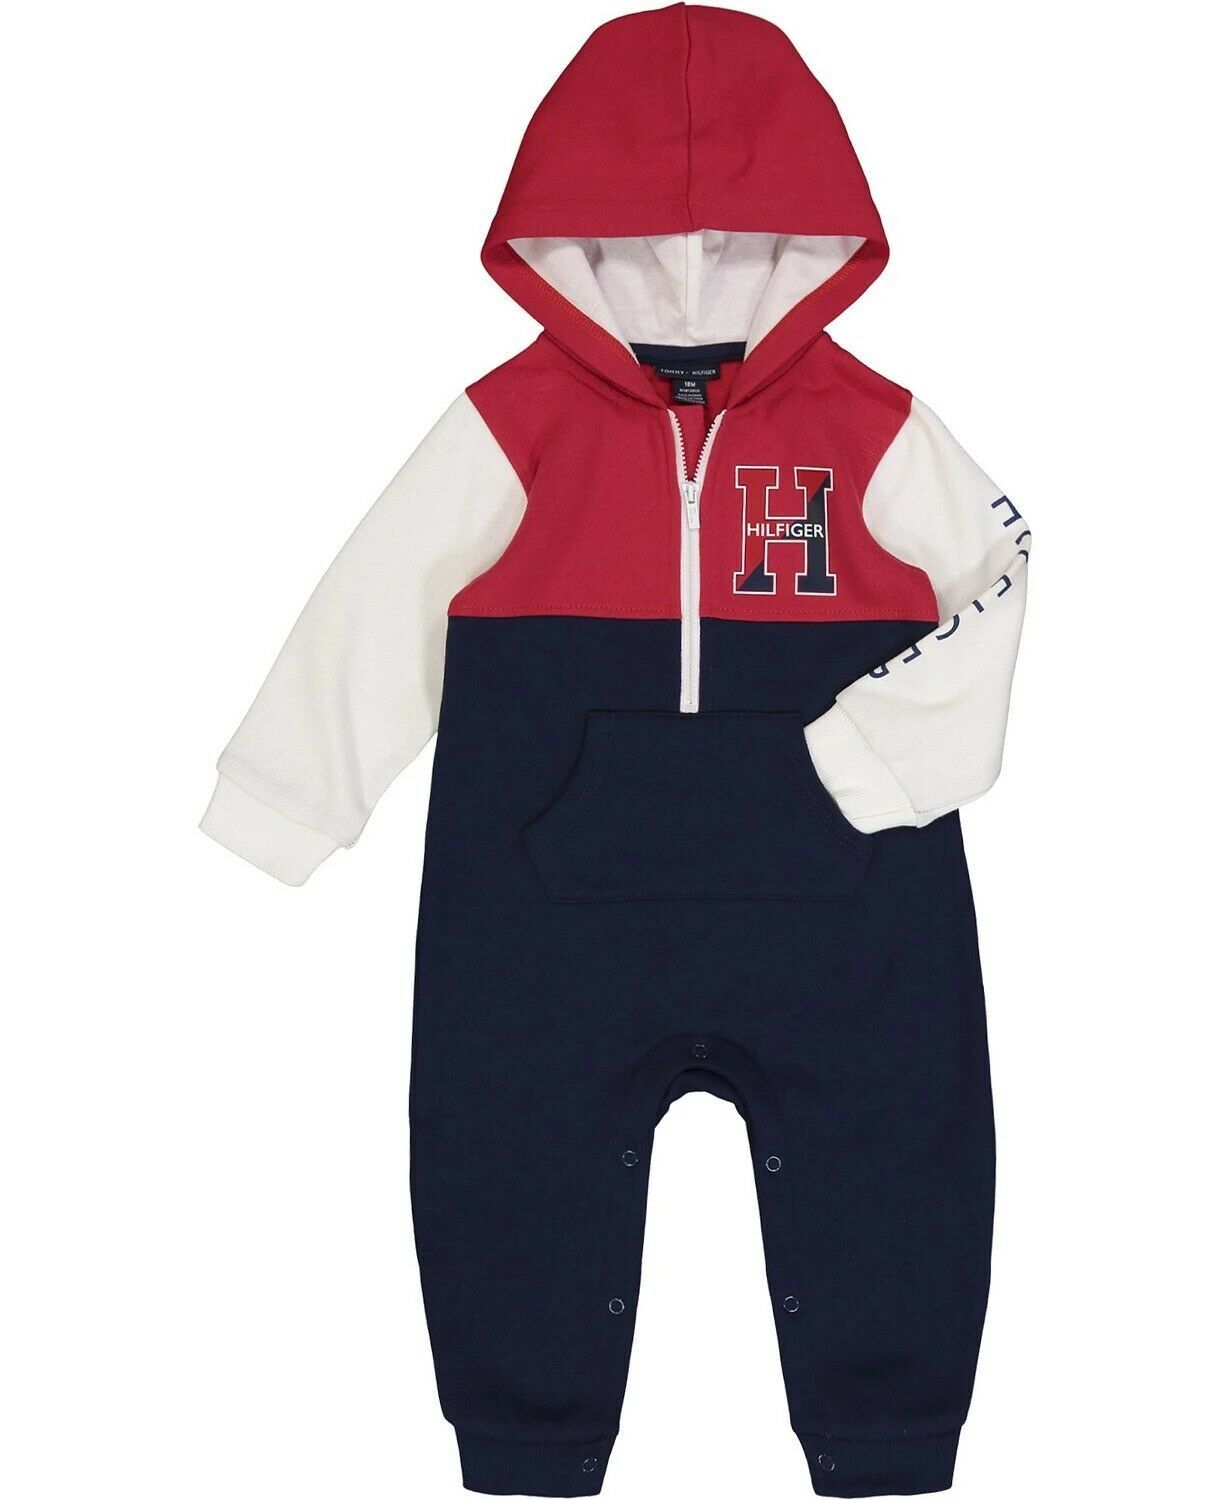 Tommy Hilfiger RED/NAVY ASSORTED Boys' Red & Navy Logo Hooded Playsuit, US 12M